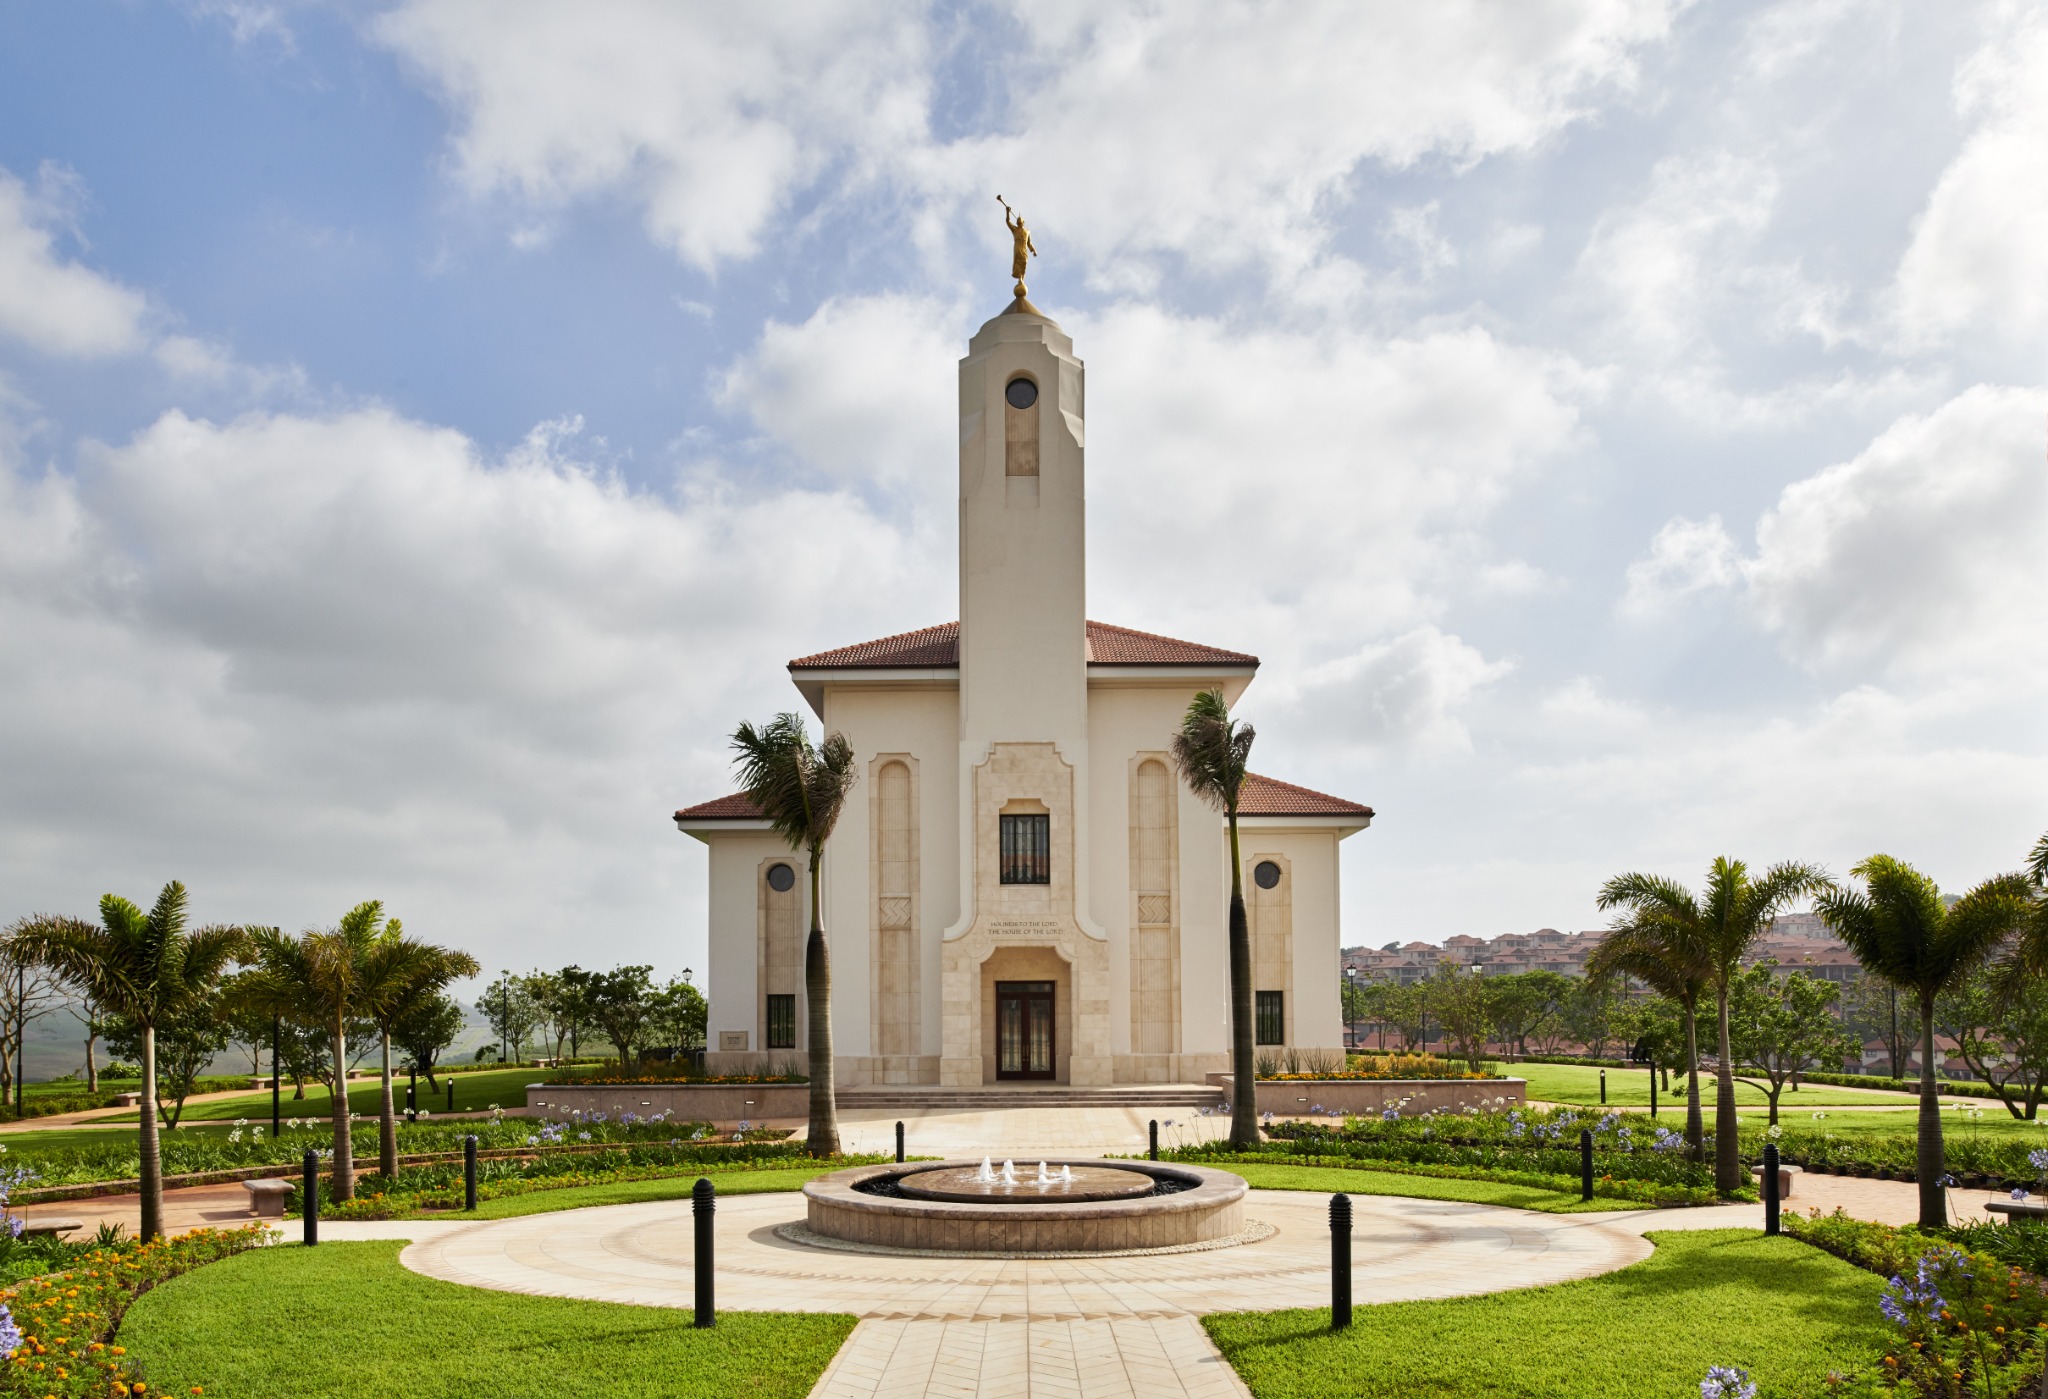 The Durban South Africa Temple, a white building with a central tower topped by a golden statue of an angel blowing a horn.